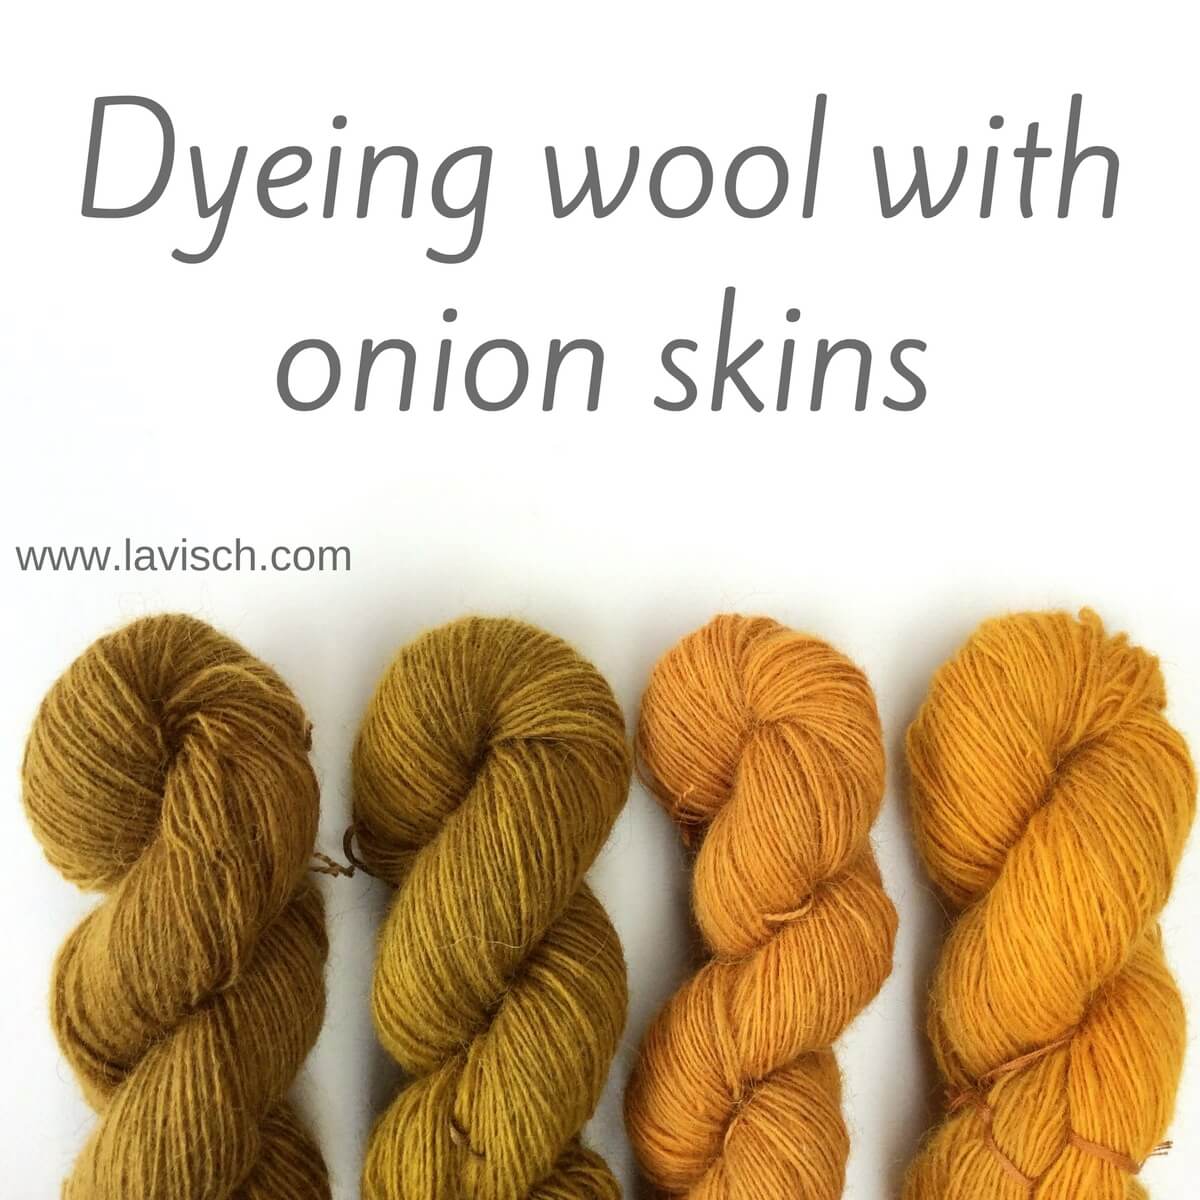 https://www.lavisch.com/site/wp-content/uploads/2017/06/Dyeing-wool-with-onion-skins_sq.jpg